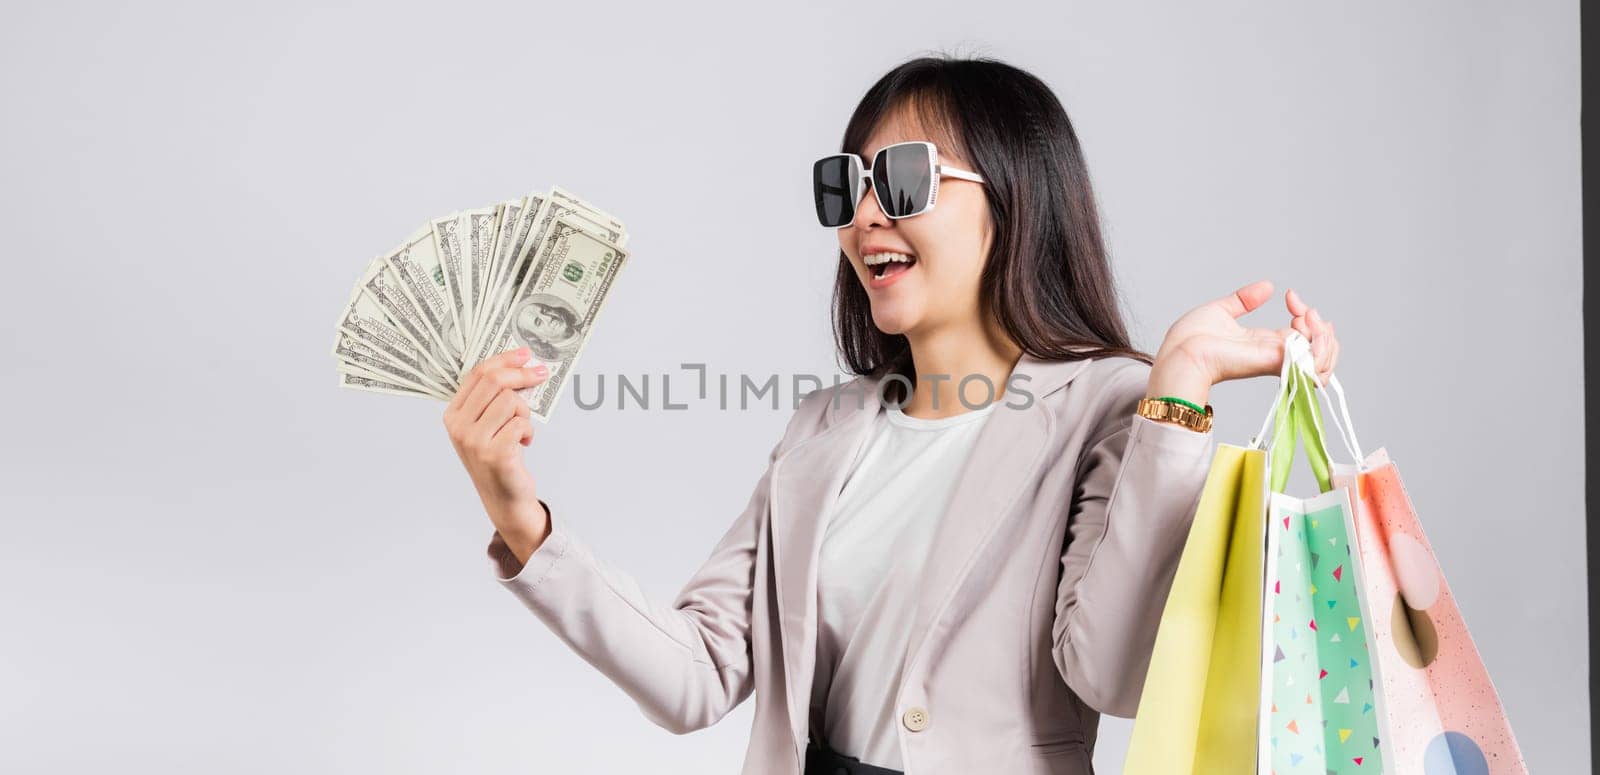 Woman with glasses confident shopper smile holding online shopping bags multicolor and dollar money banknotes on hand by Sorapop